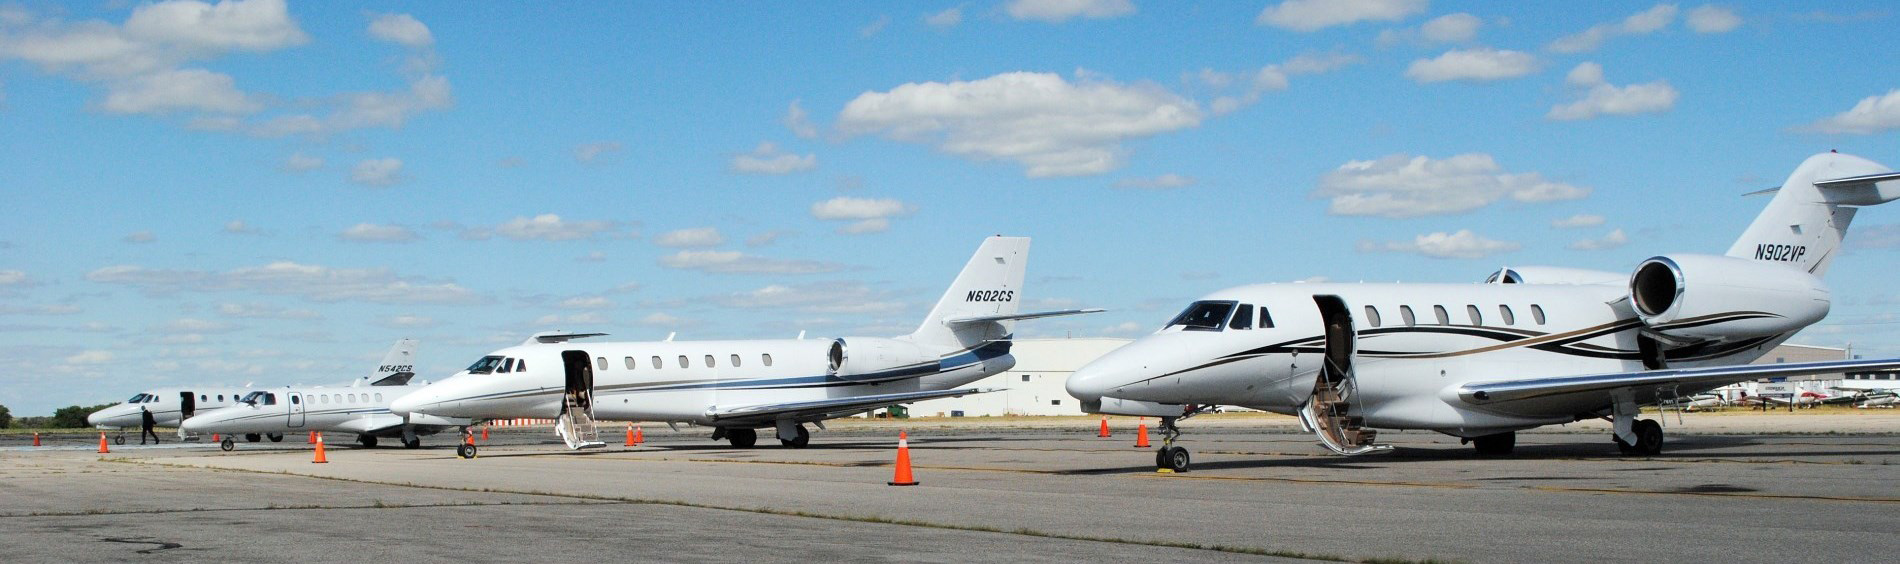 Four planes parked at the Brantford Municipal Airport